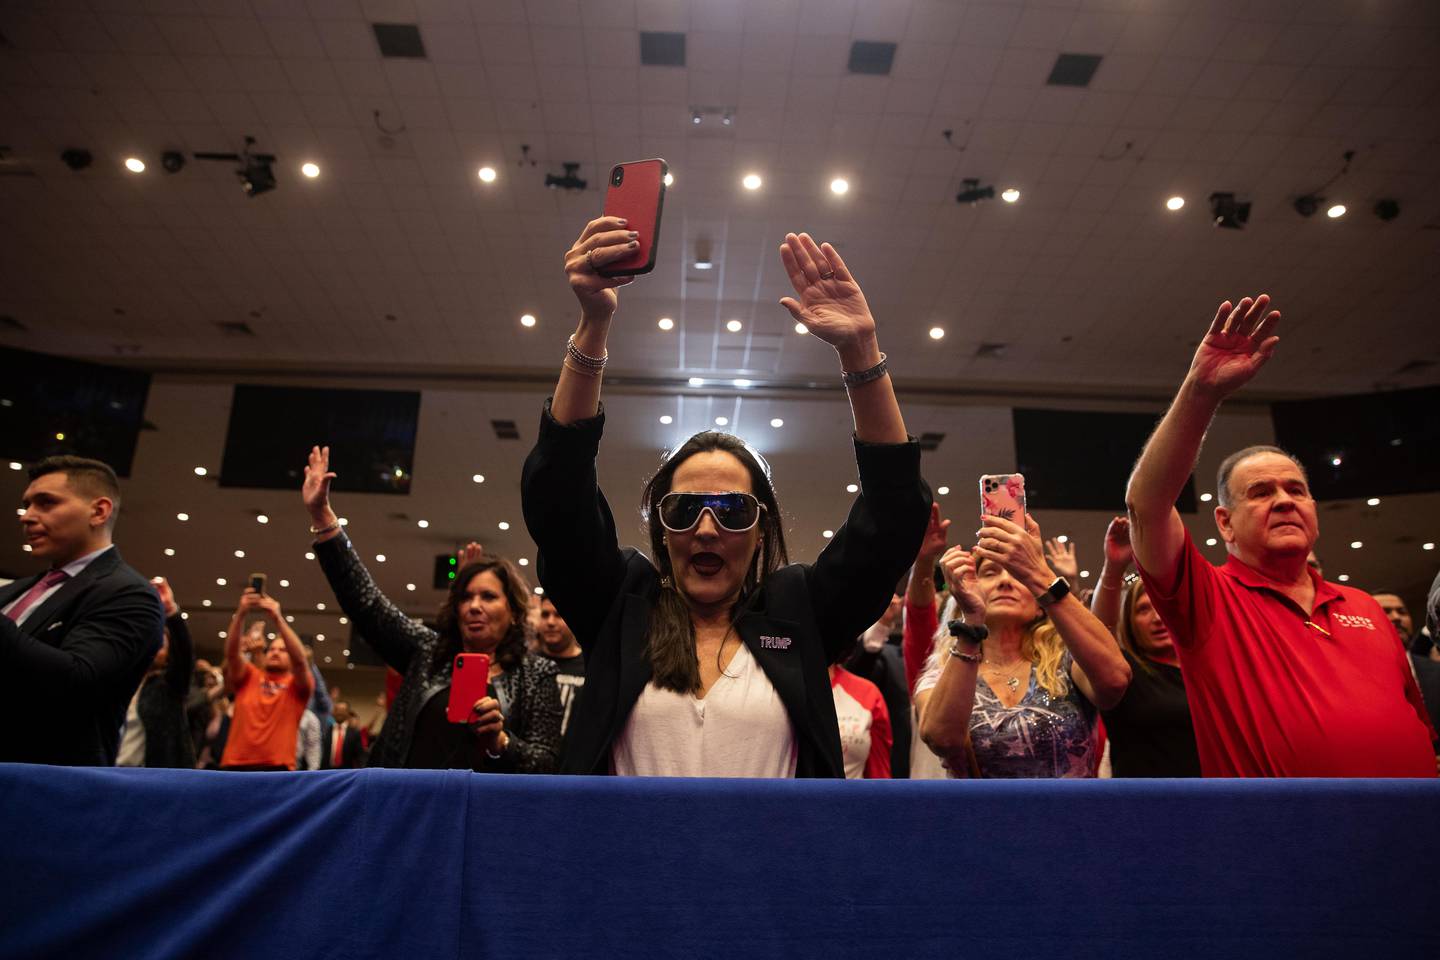 Supporters of President Donald Trump pray during an "Evangelicals for Trump Coalition Launch" at King Jesus International Ministry, Friday, Jan. 3, 2020, in Miami. (AP Photo/ Evan Vucci)